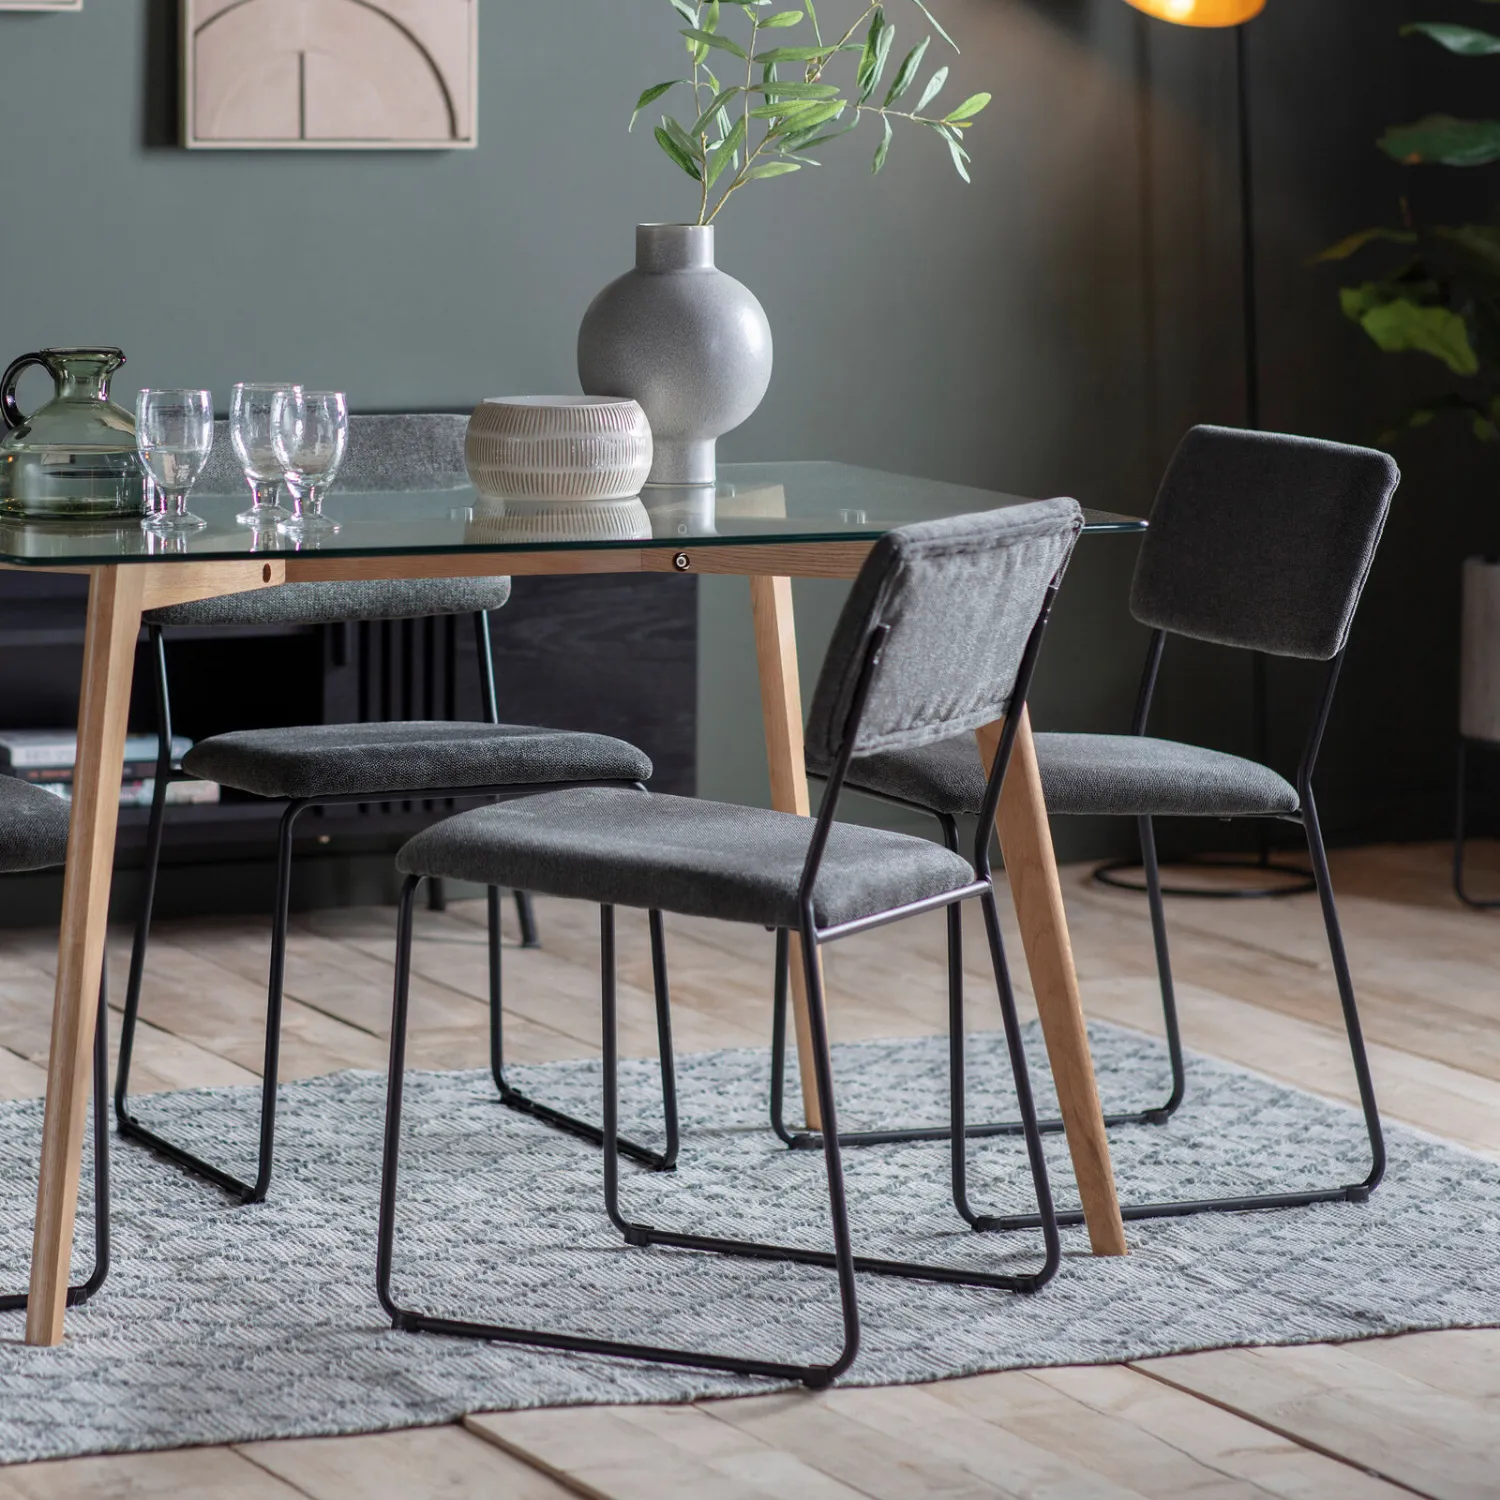 Charcoal Fabric Upholstered Dining Chair